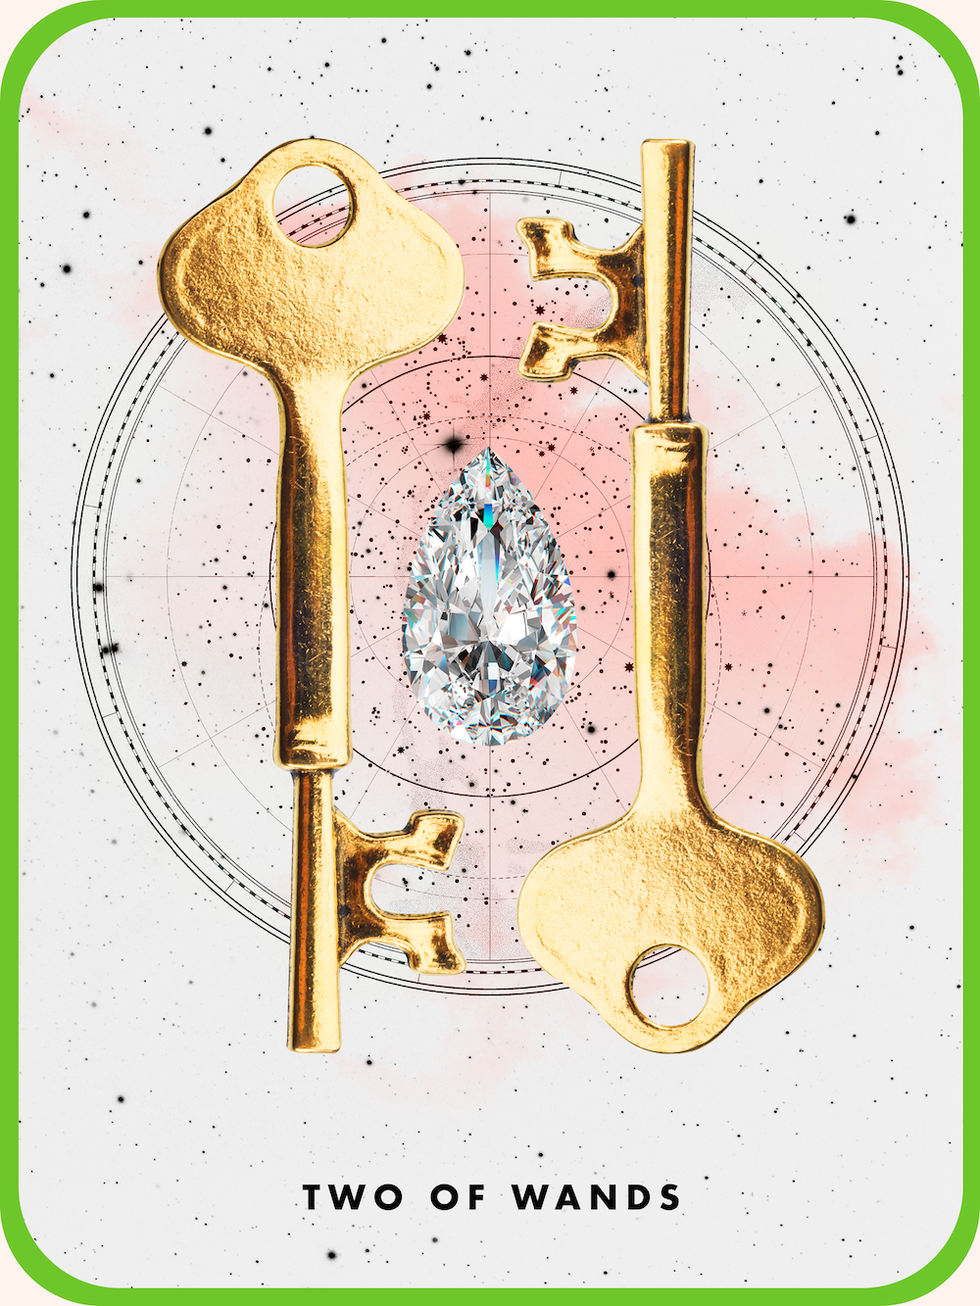 the tarot card the two of wands, showing two golden keys over a pink sky and a diamond